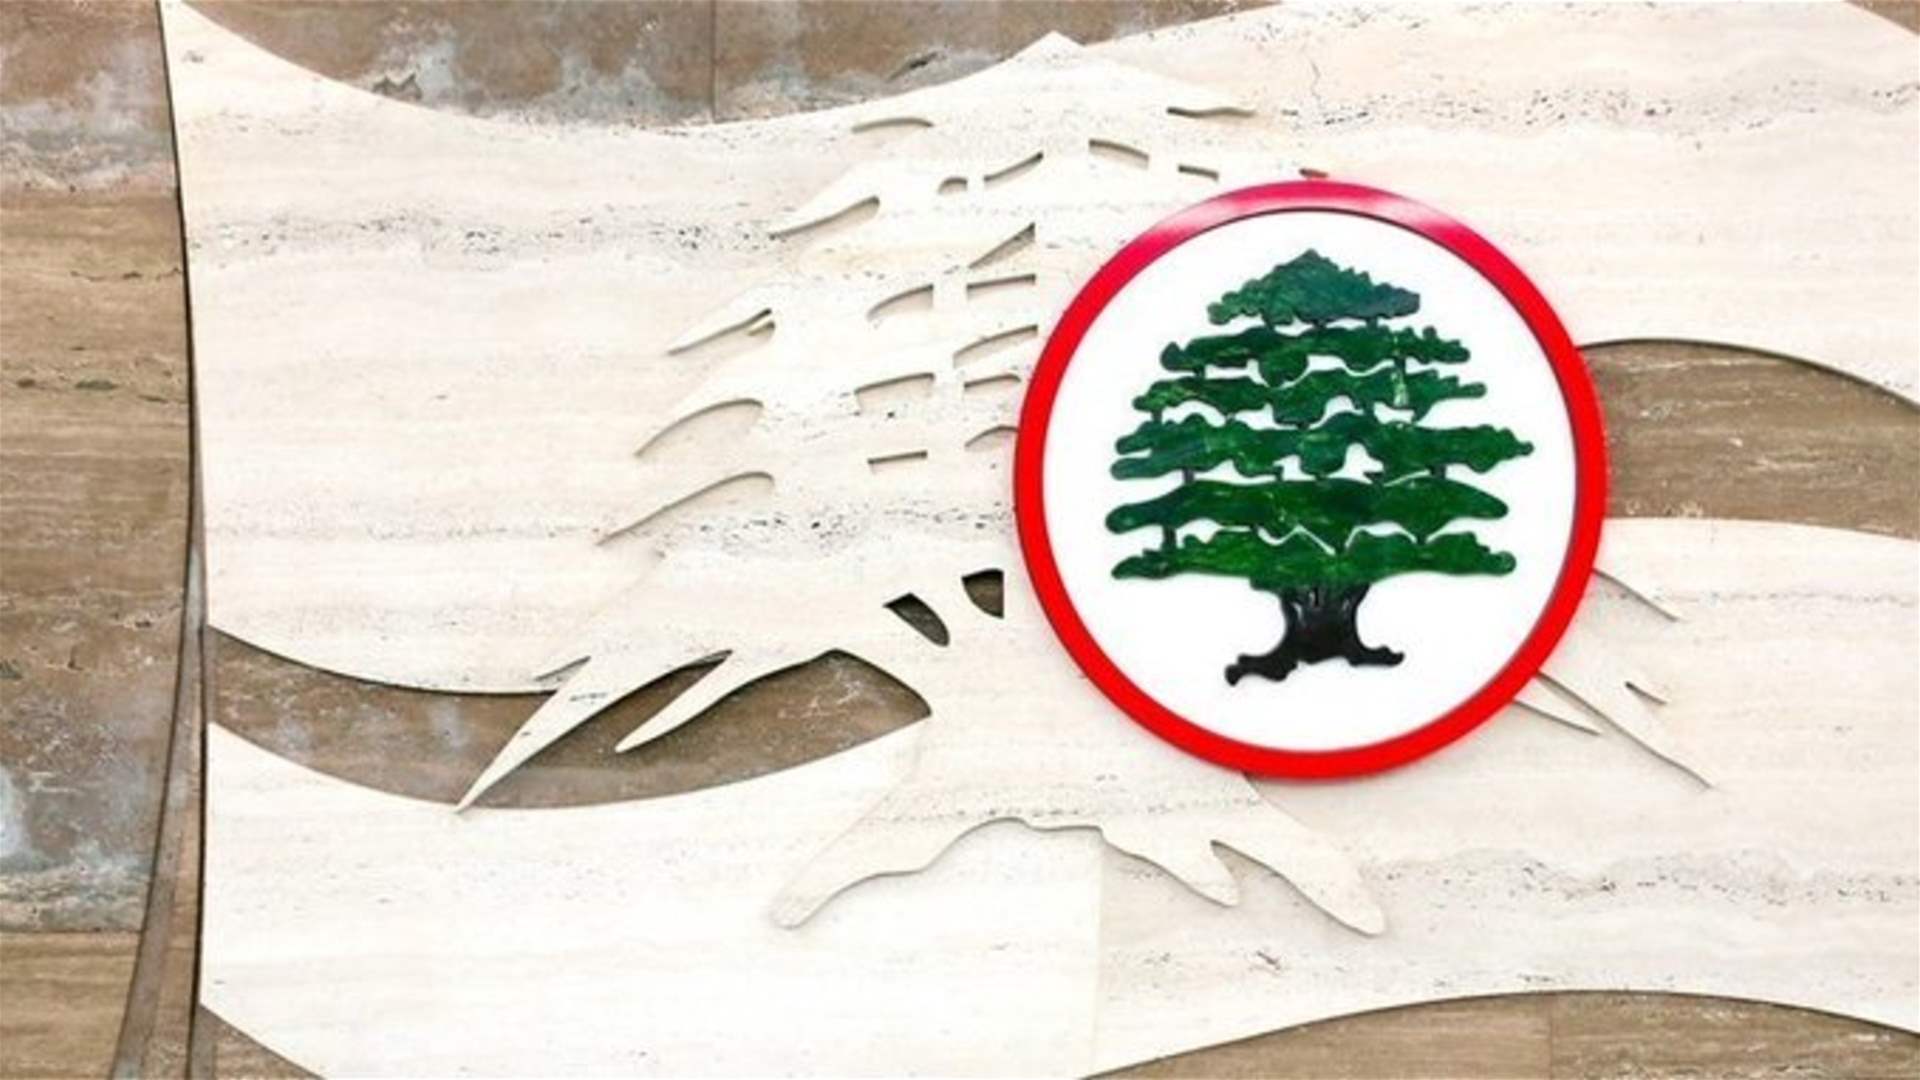 Achieving voluntary return: Lebanese Forces party highlights path forward in response to European Parliament resolution